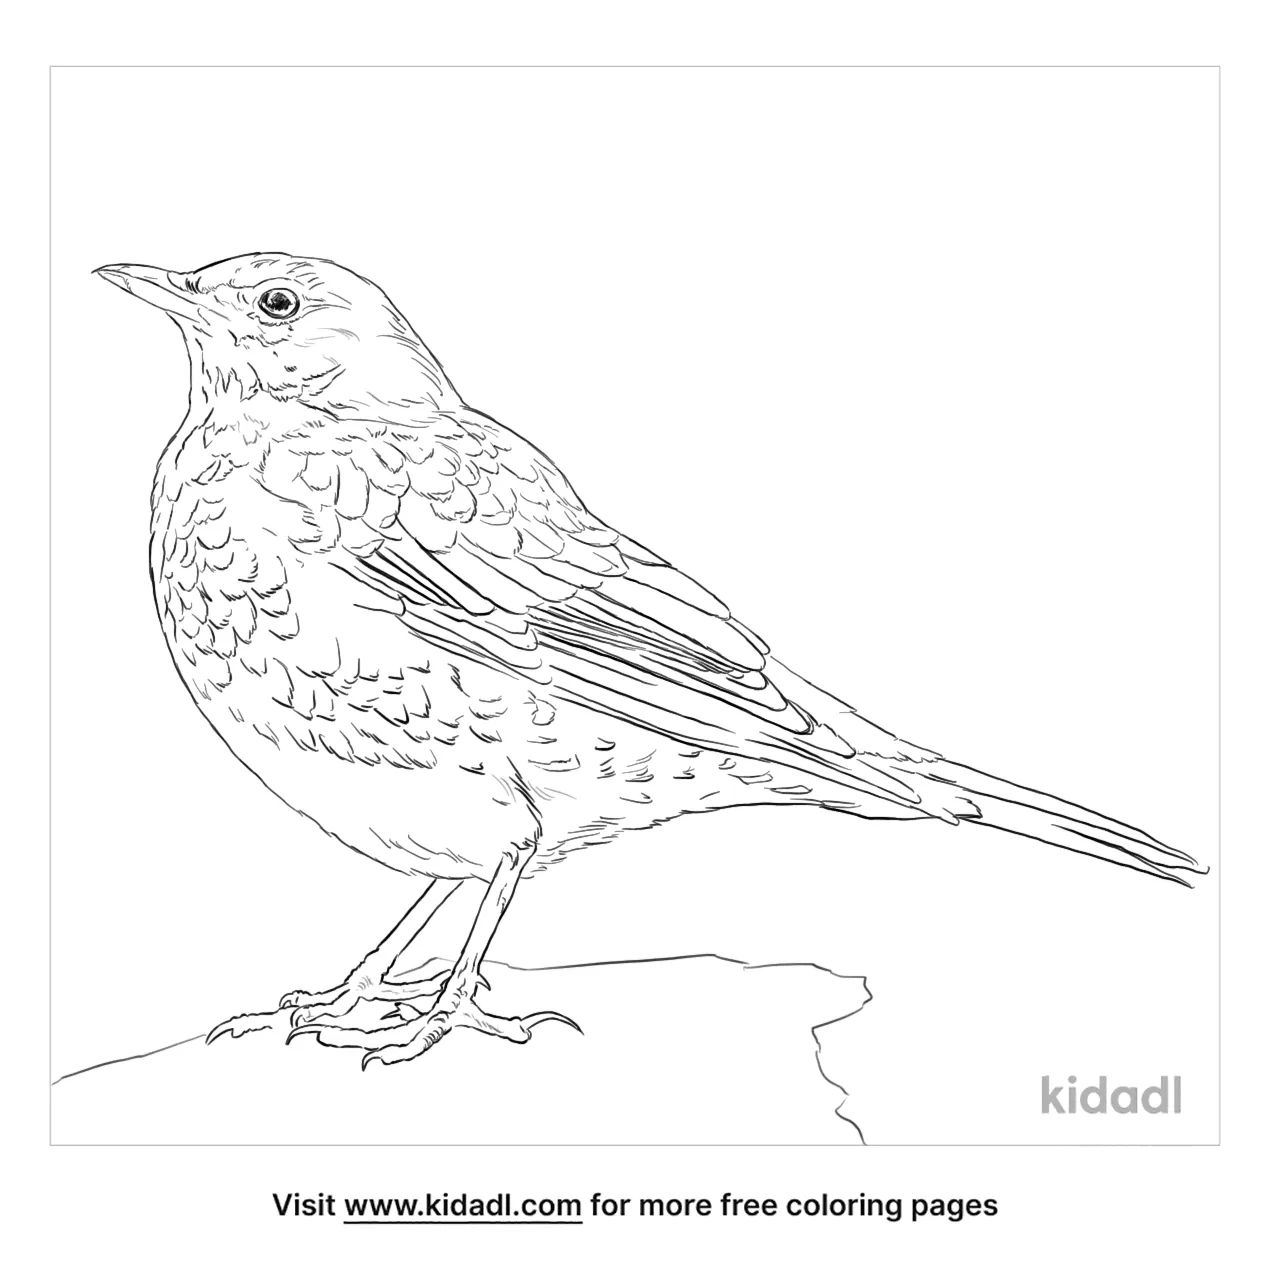 Free Fieldfare Coloring Page | Coloring Page Printables | Kidadl